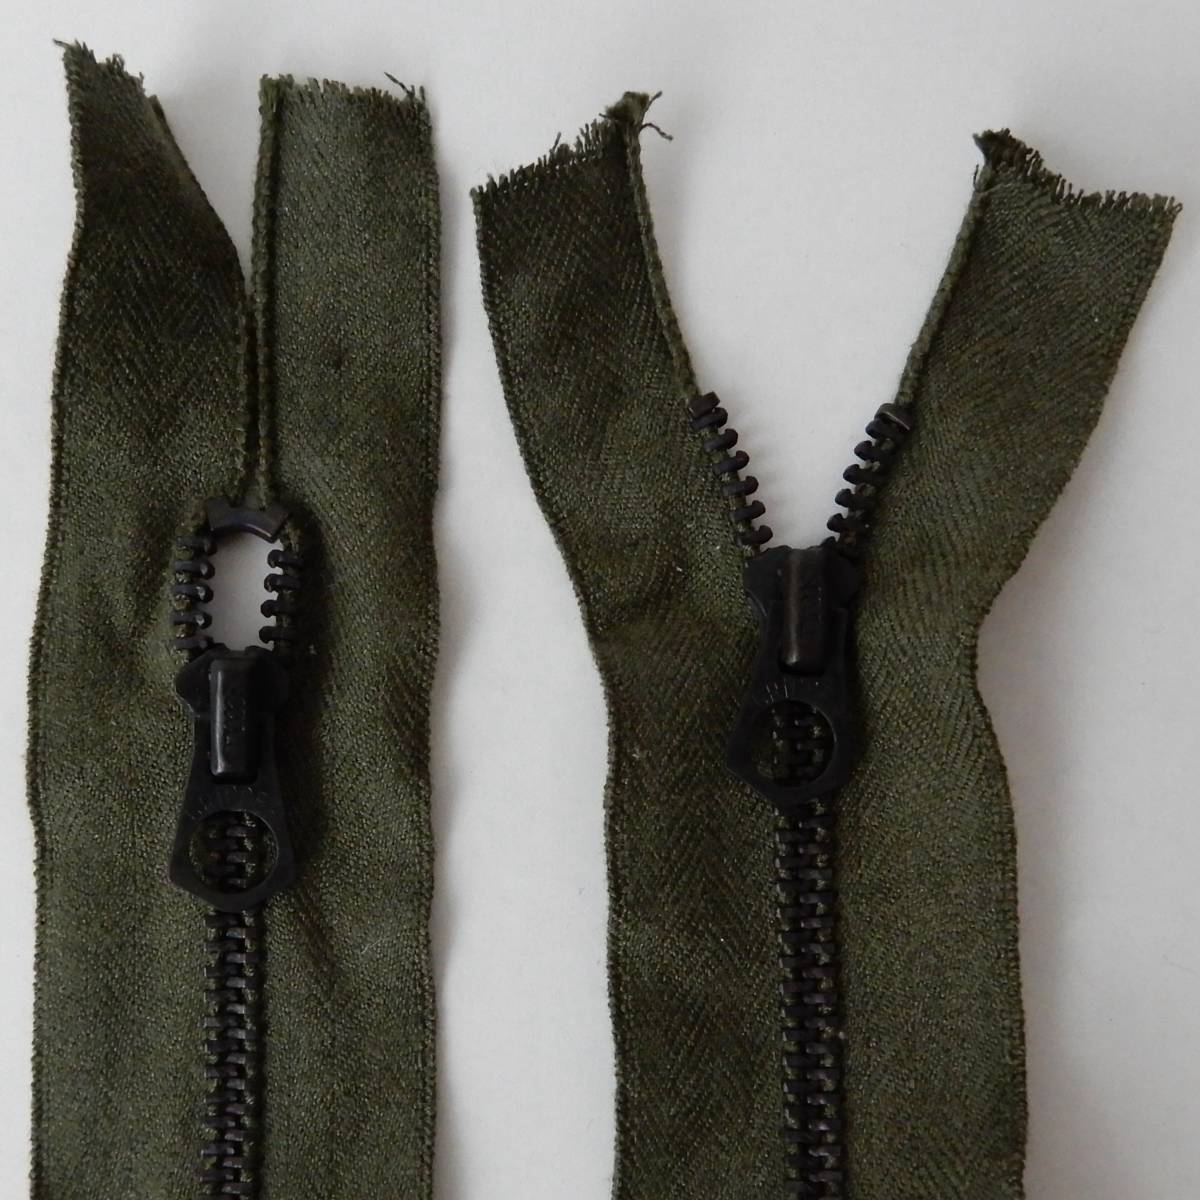 SCOVILL GRIPPER Zipper Double Tab 1970s OLIVE Deadstock Made in USA ⑤ Vintage スコービル グリッパージッパー 1970年代 ヴ